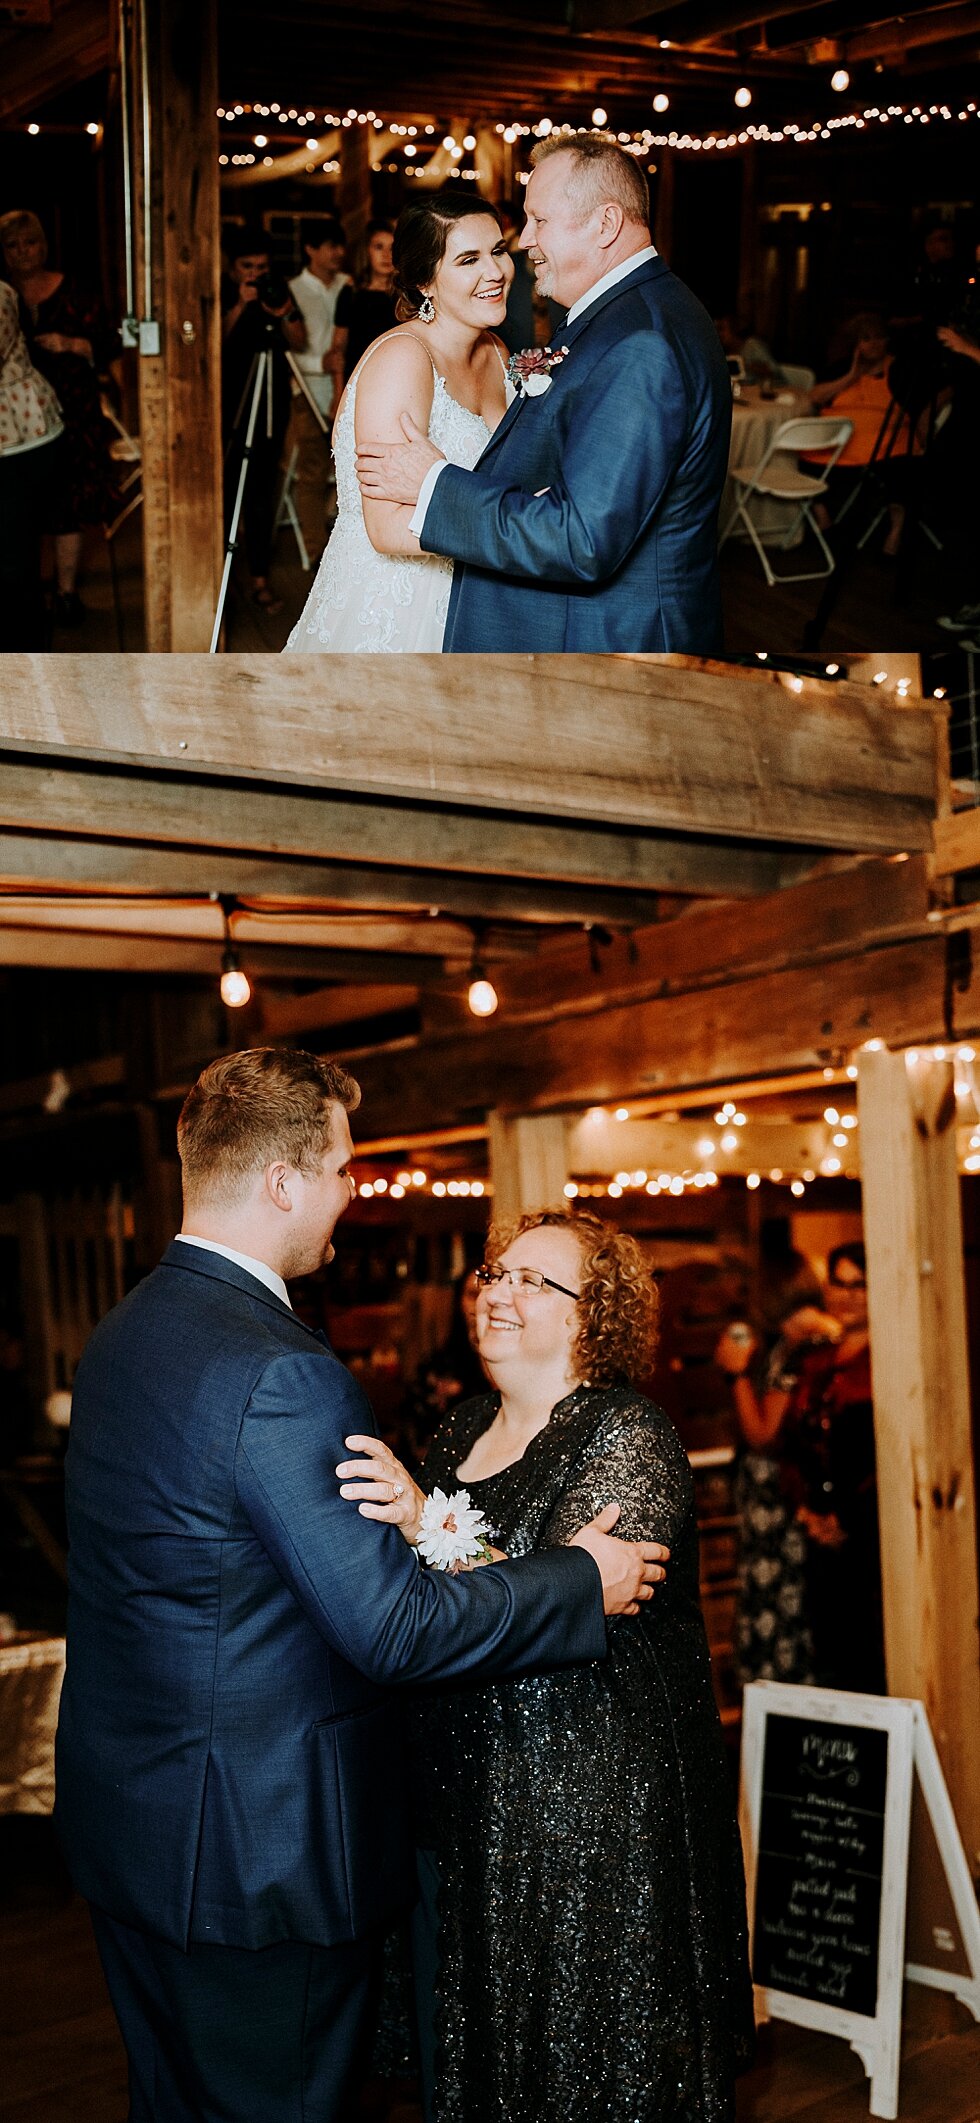  Proud parents of the bride and groom sharing their first dance together #weddinggoals #weddingphotographer #married #ceremonyandreception #kentuckyphotographer #indianaphotographer #louisvillephotographer #weddingphotos #husbandandwife #gorgeouswedd